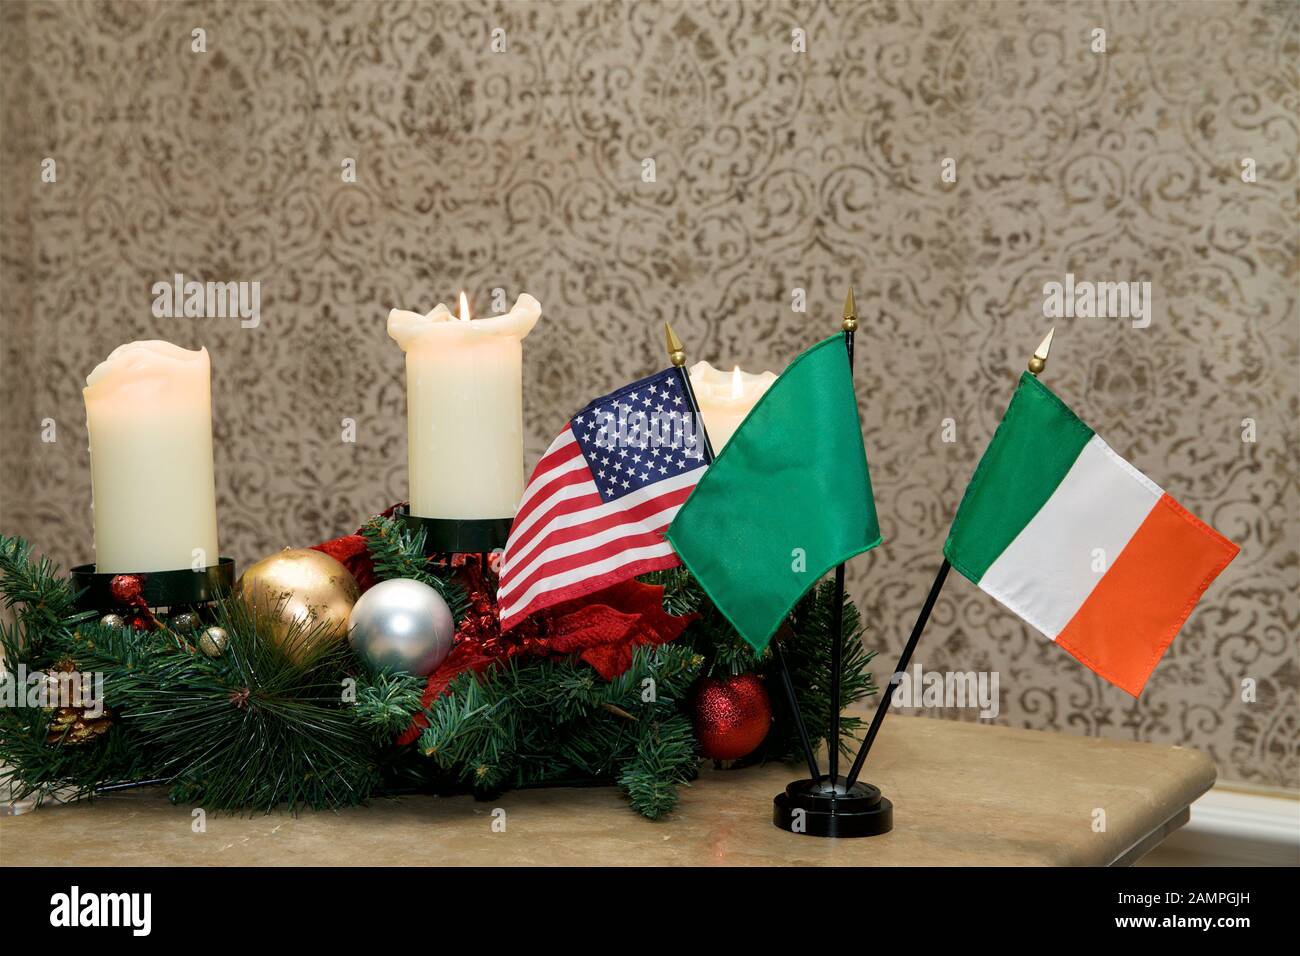 Irish American Christmas background: Miniature Irish and American flags with Christmas decorations and candles. Stock Photo